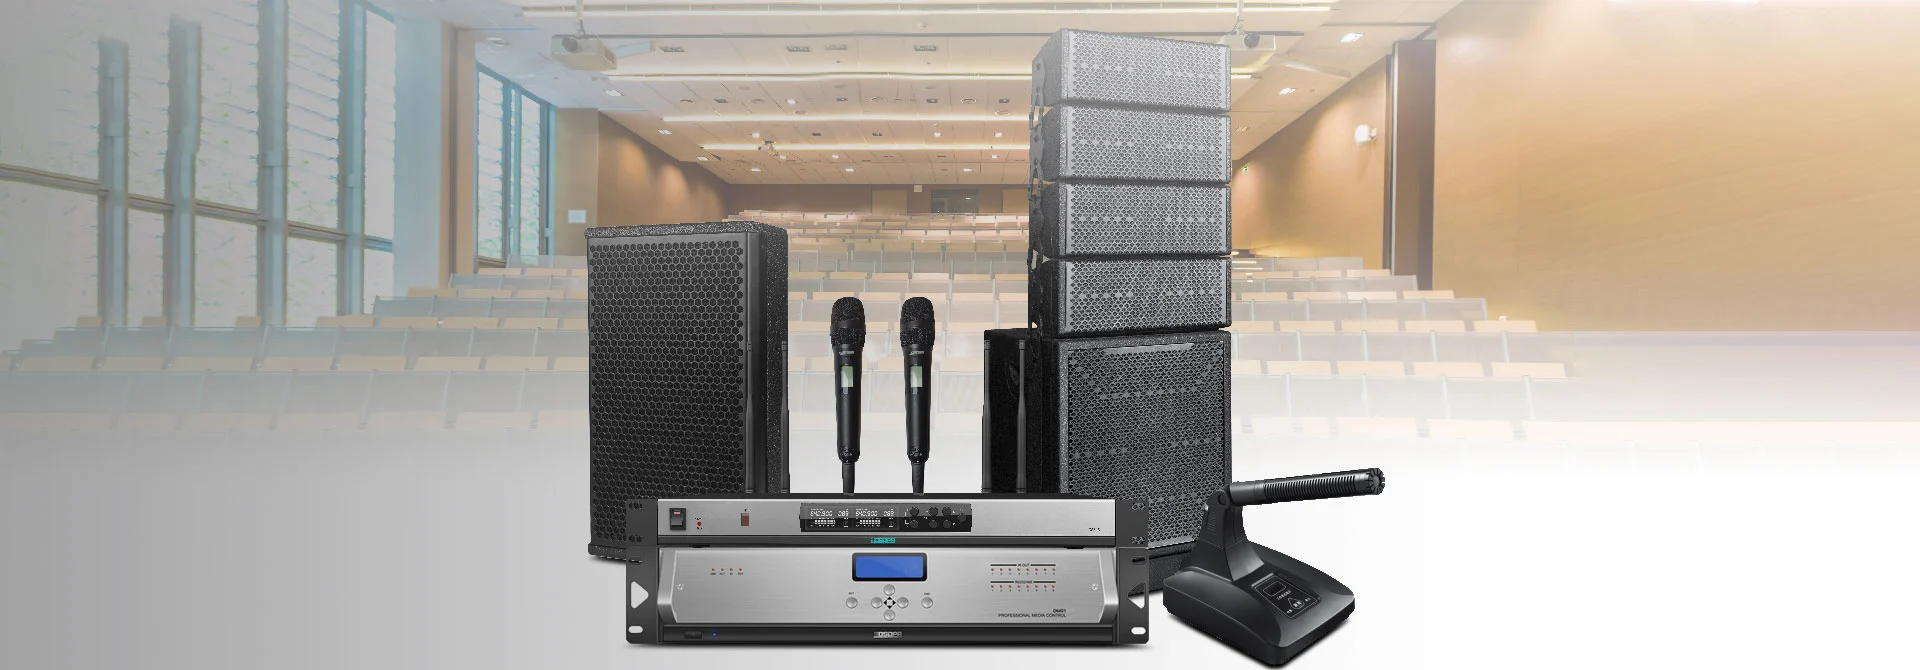 Pro Sound System for Large Conference Rooms